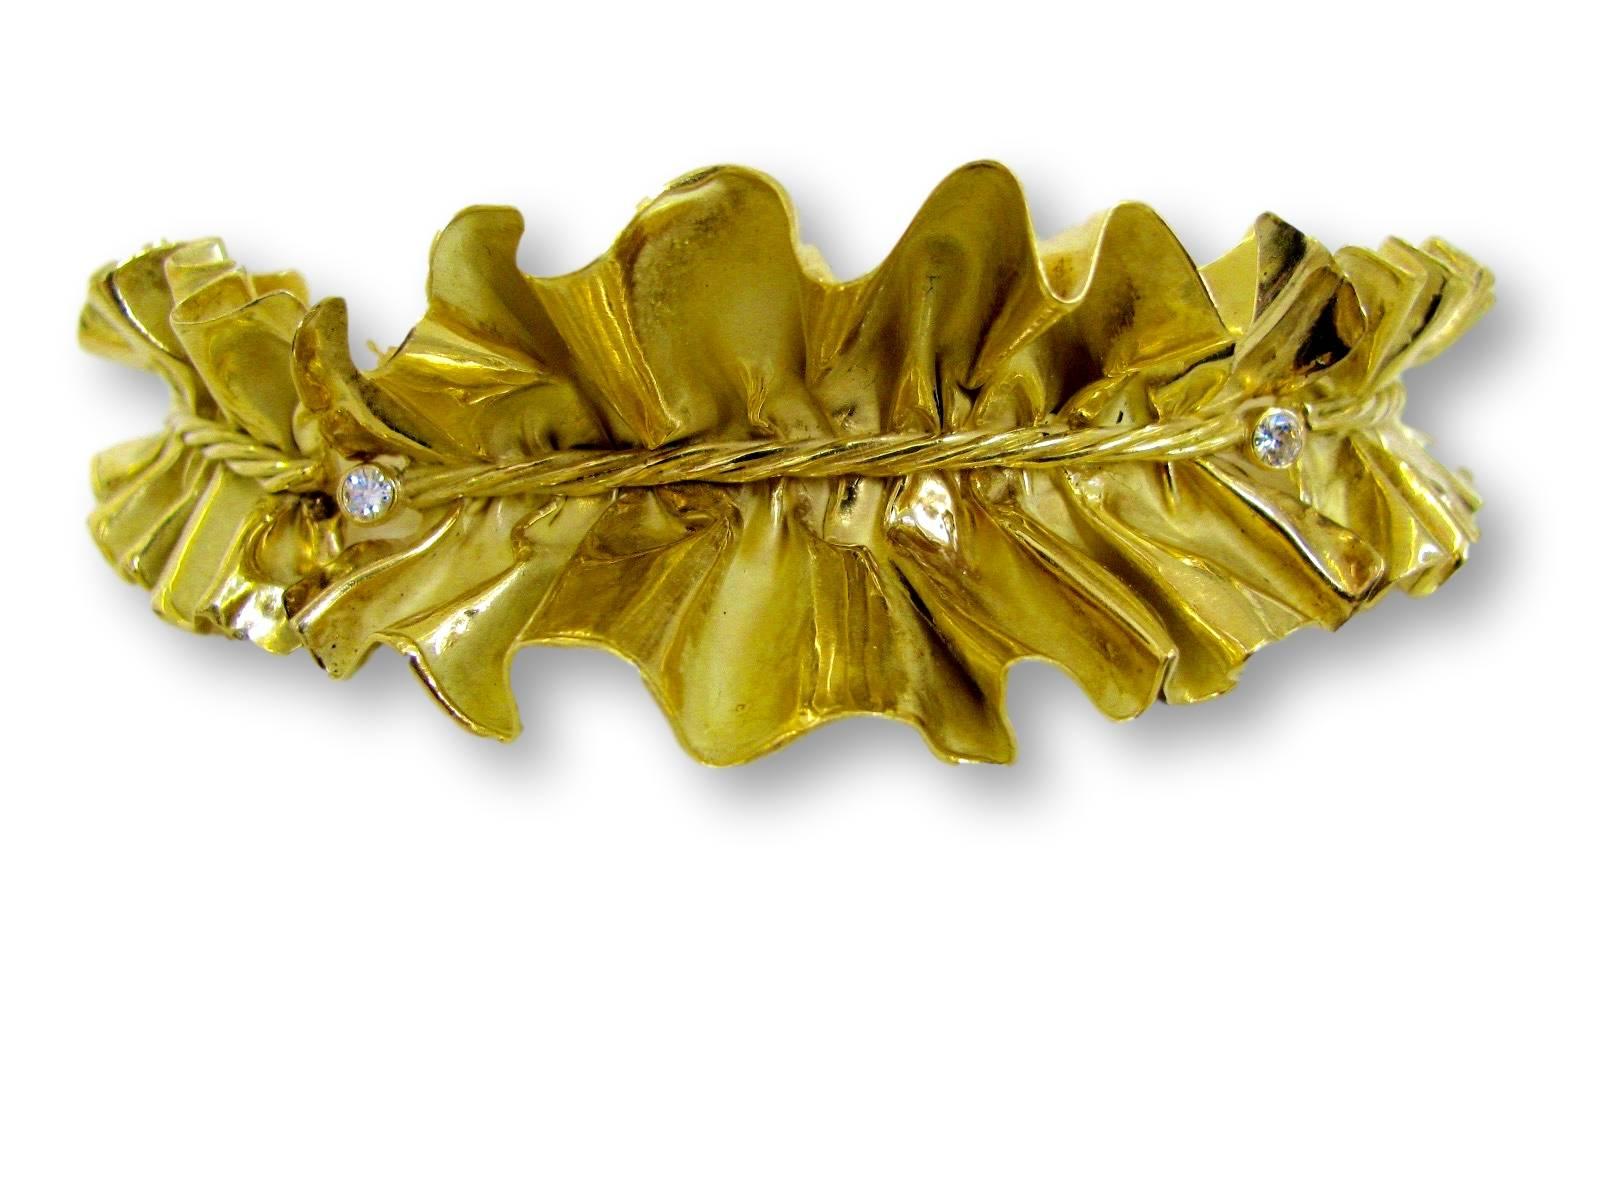 Anna Maria Cammilli hand made gold necklace. The Necklace, in the style of a Ruff Collar, fashioned in 18k yellow gold with both a mat and mirror finish. This fabulous piece of Artist- Jewelry appears to be an early work by Cammilli who premiered